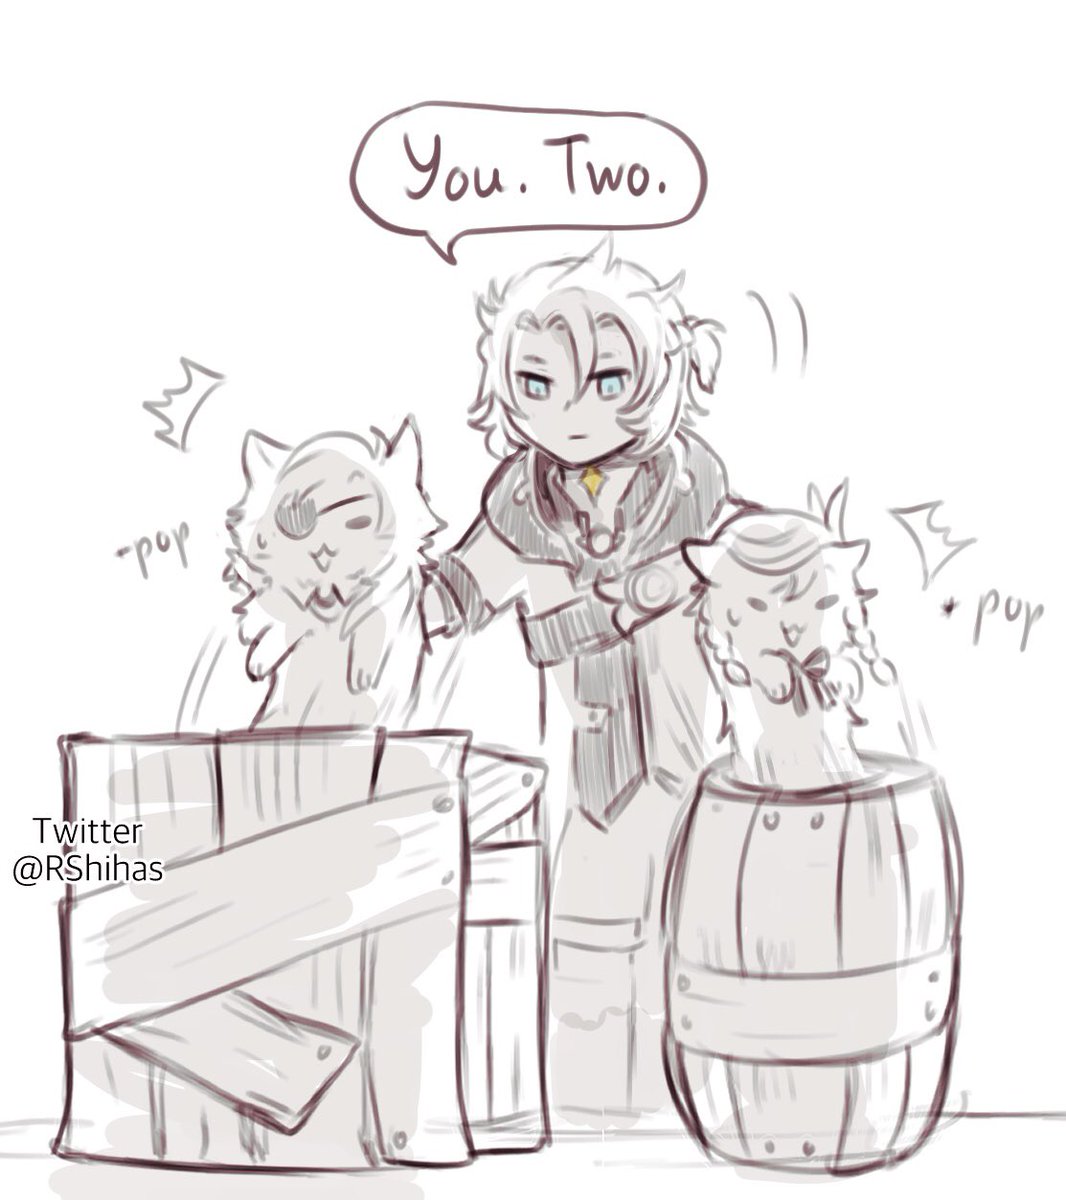 My first Windtrace event went like this.
Me (as Kaeya because he's fast) and Venti hid behind the domain which probably looks suspicious for 2 props to fit there
And Hunter Albedo, smarter than two of our brain cells combined, came straight up to catch us.
#原神 #GenshinImpact 